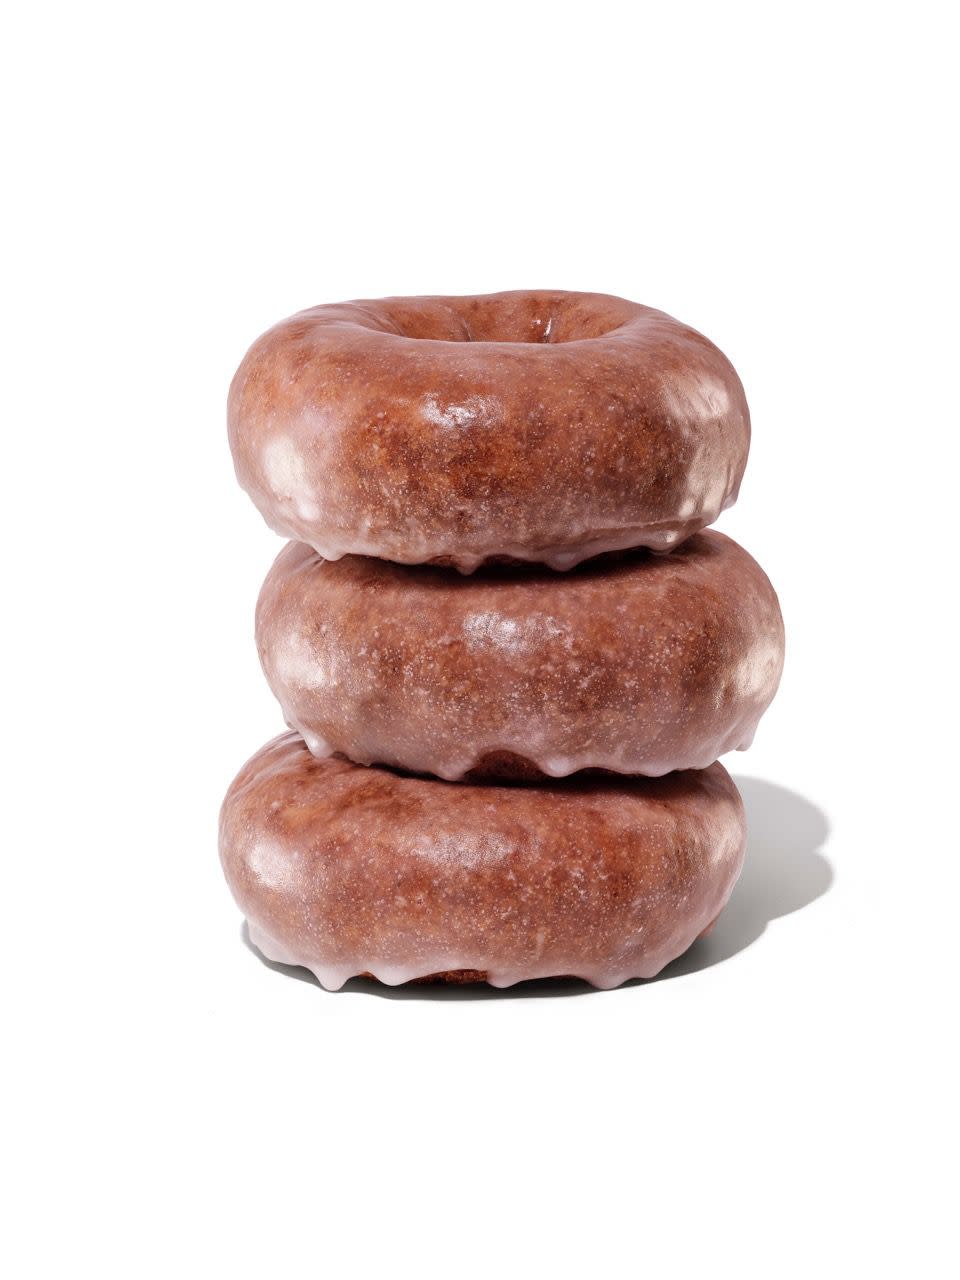 Dunkin' Retail 23 Window 5 Retouched Product Image: (3) Pumpkin Donuts, in a stack
(image + shadow + white background/transparency)